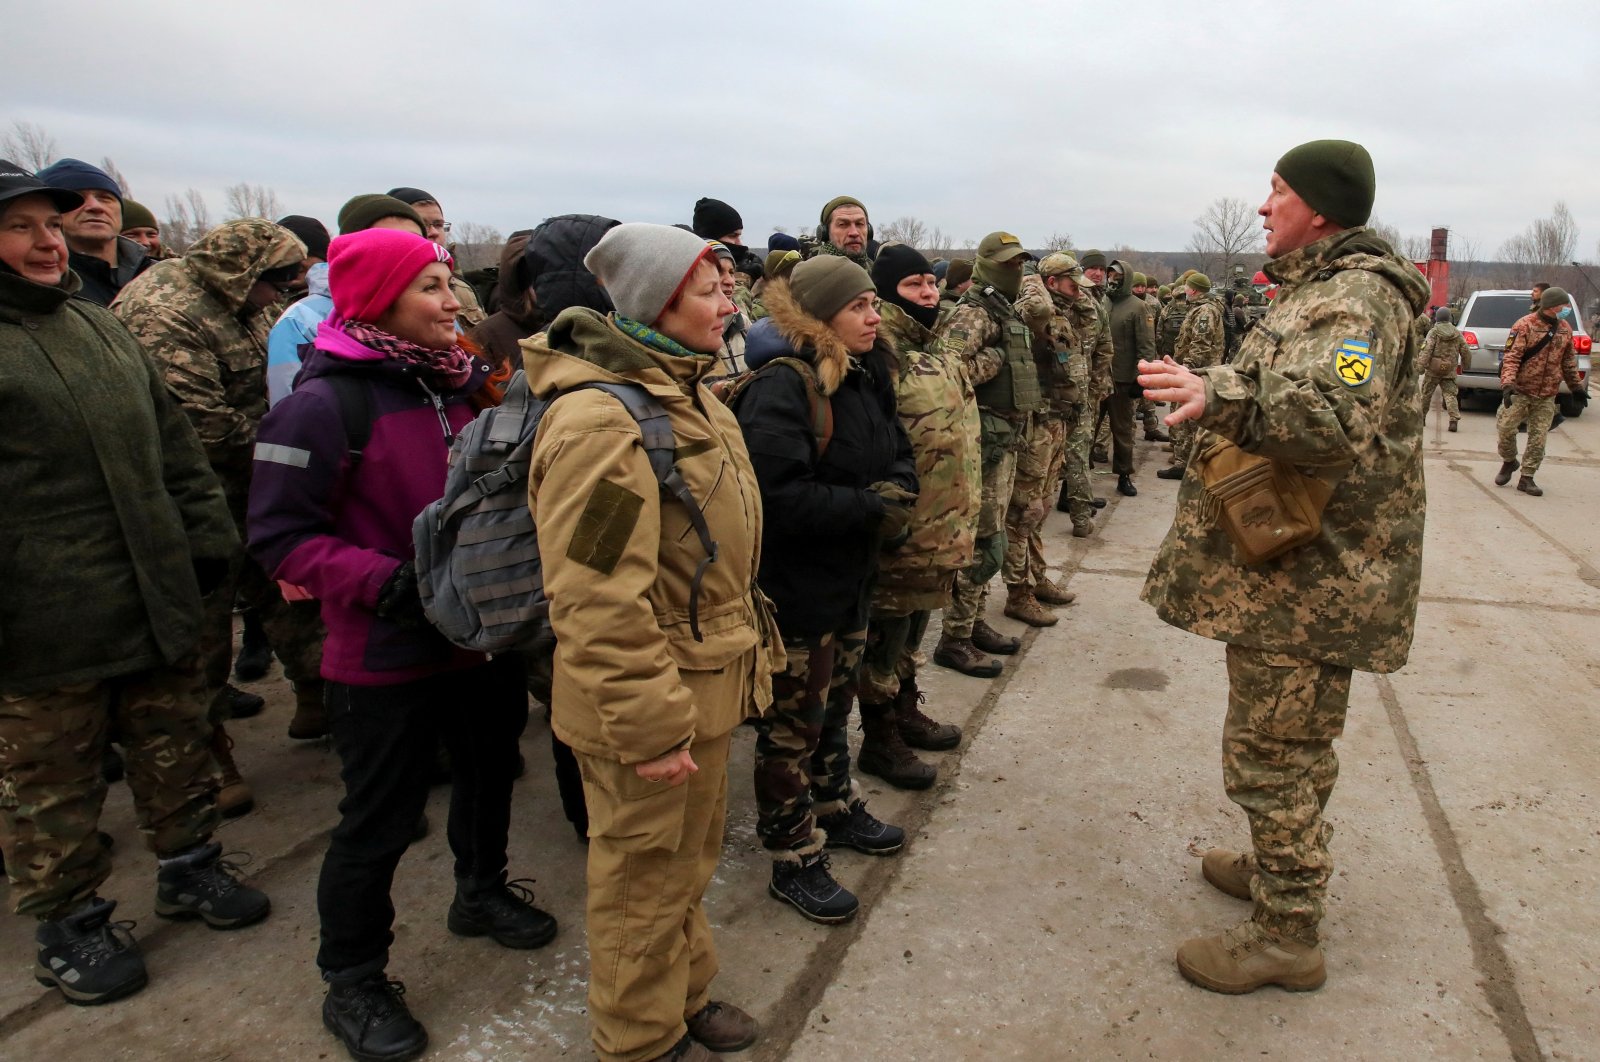 Reservists of the Ukrainian Territorial Defence Forces listen to instructions during military exercises at a training ground outside Kharkiv, Ukraine, Dec. 11, 2021. (Reuters Photo)